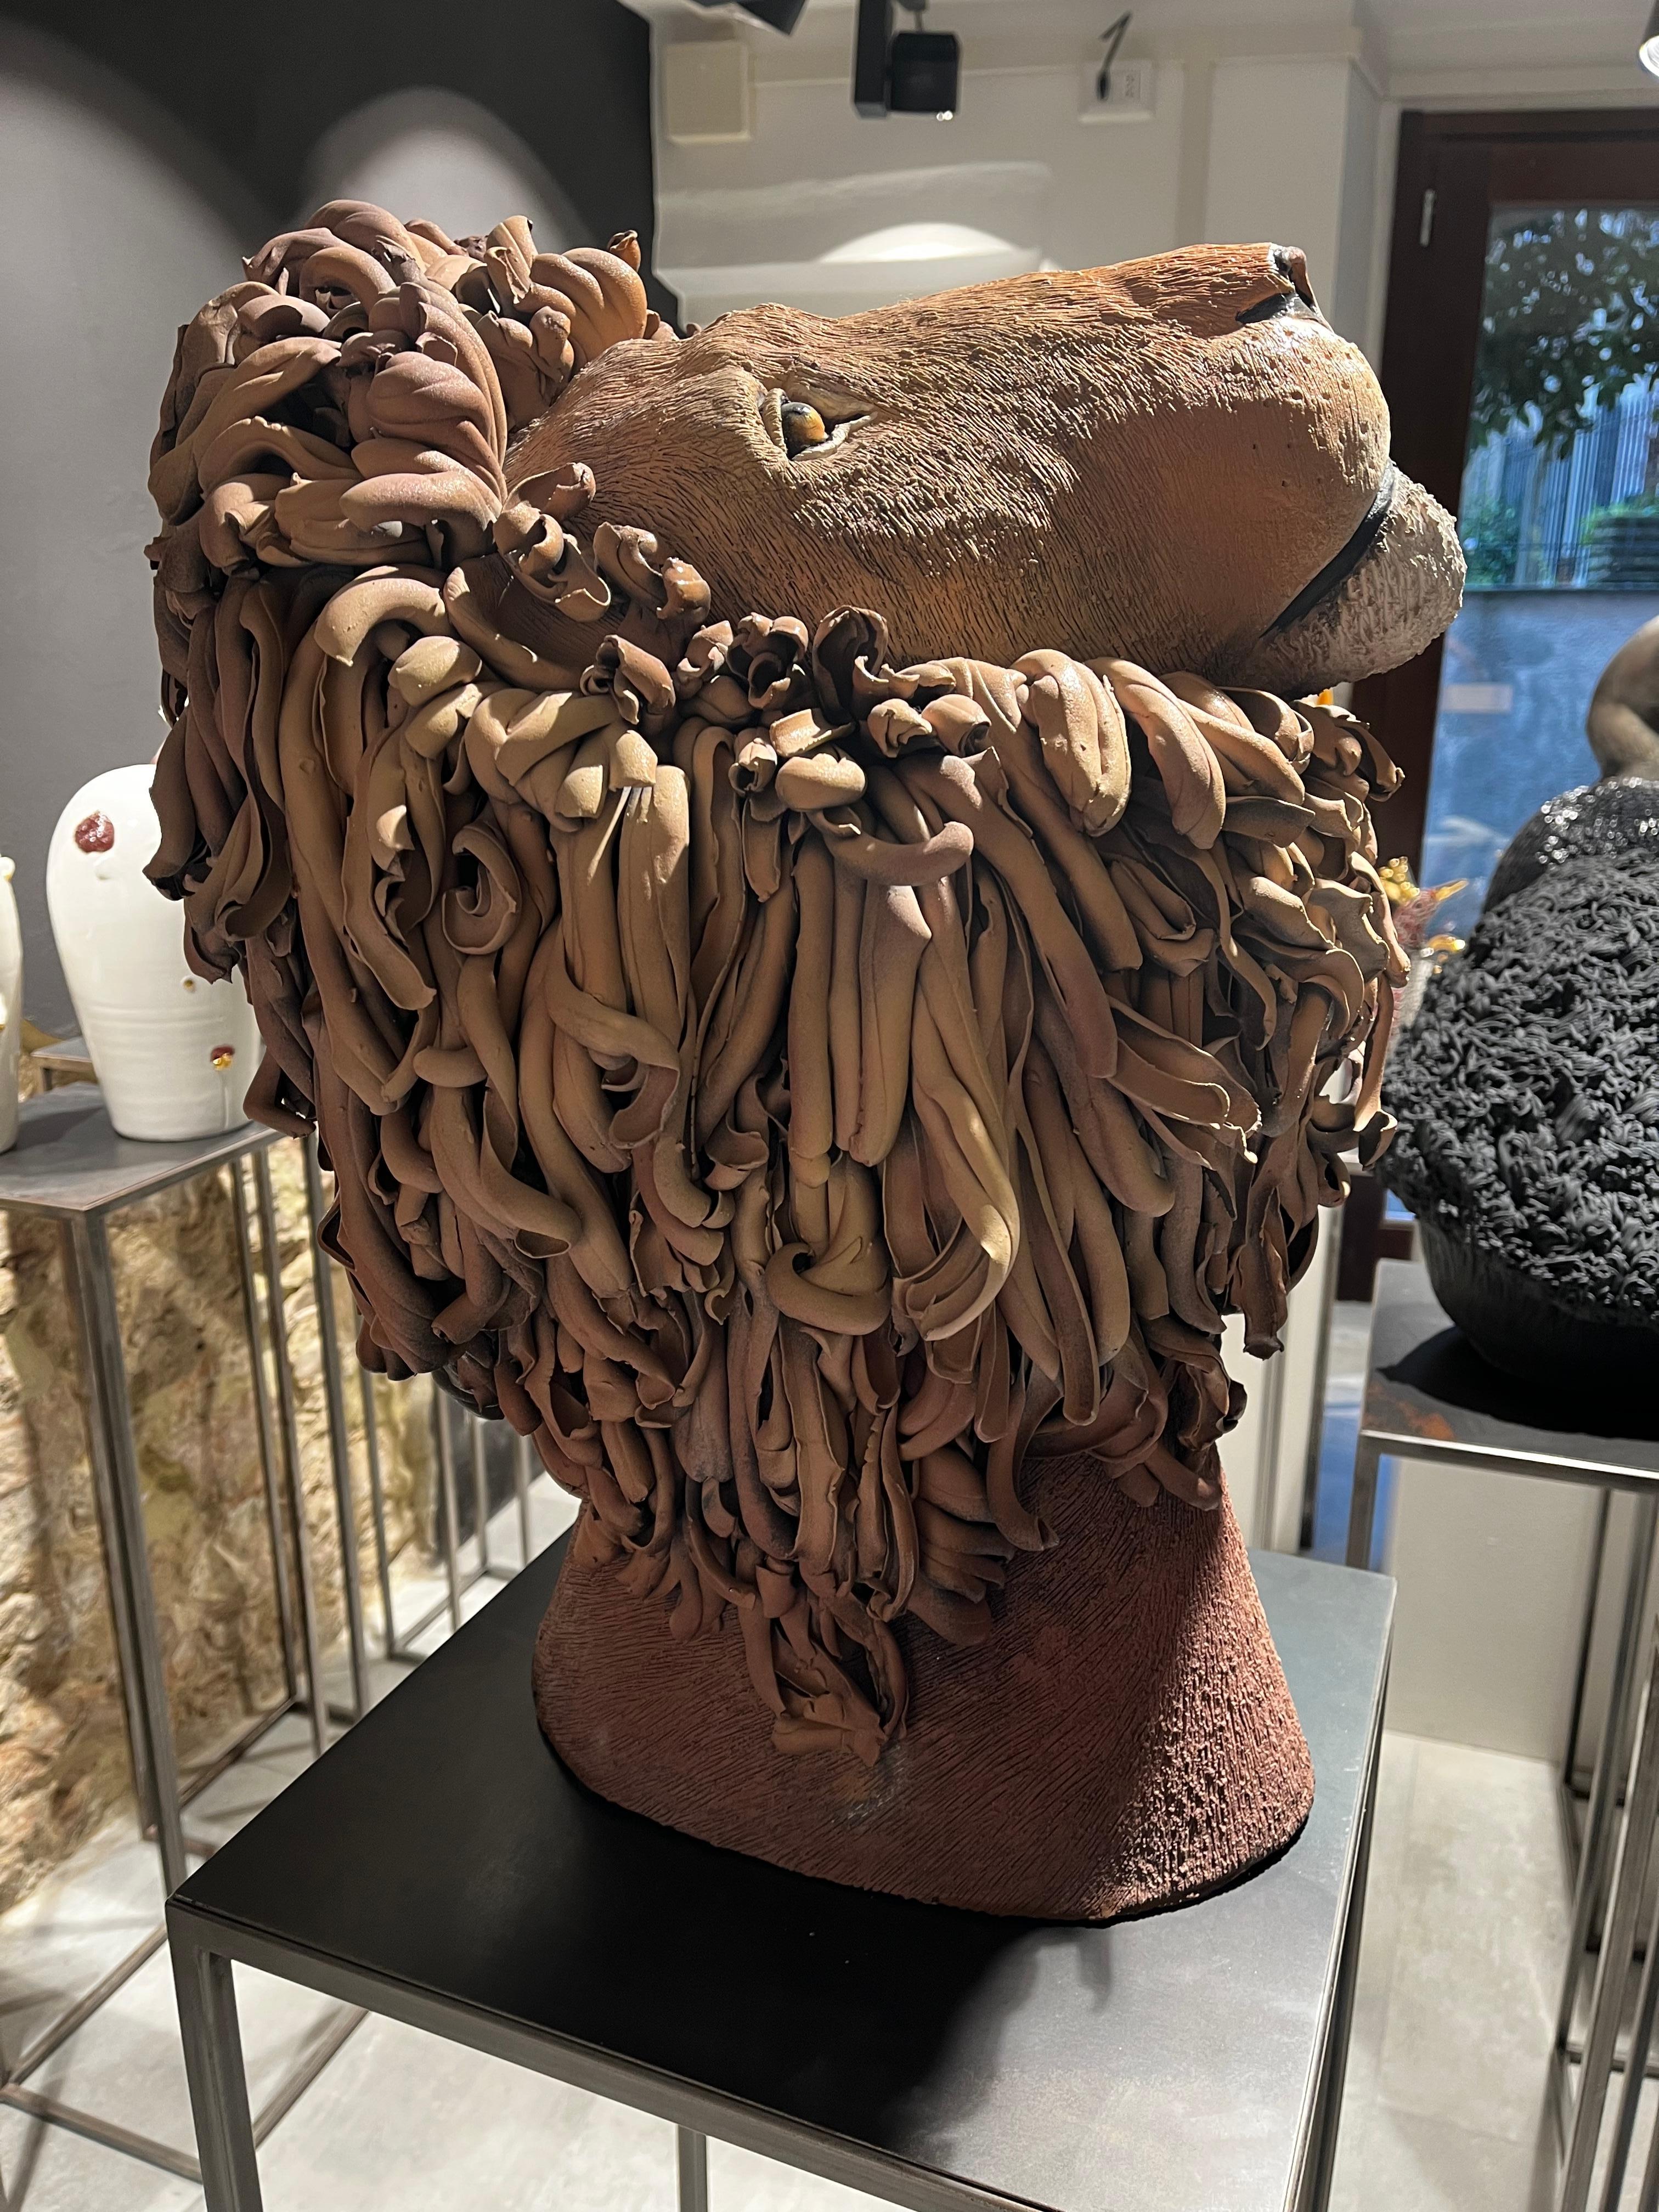 Italian Brown Lion Ceramic Sculpture Centerpiece, Completely Handmade Without Mold. 2023 For Sale